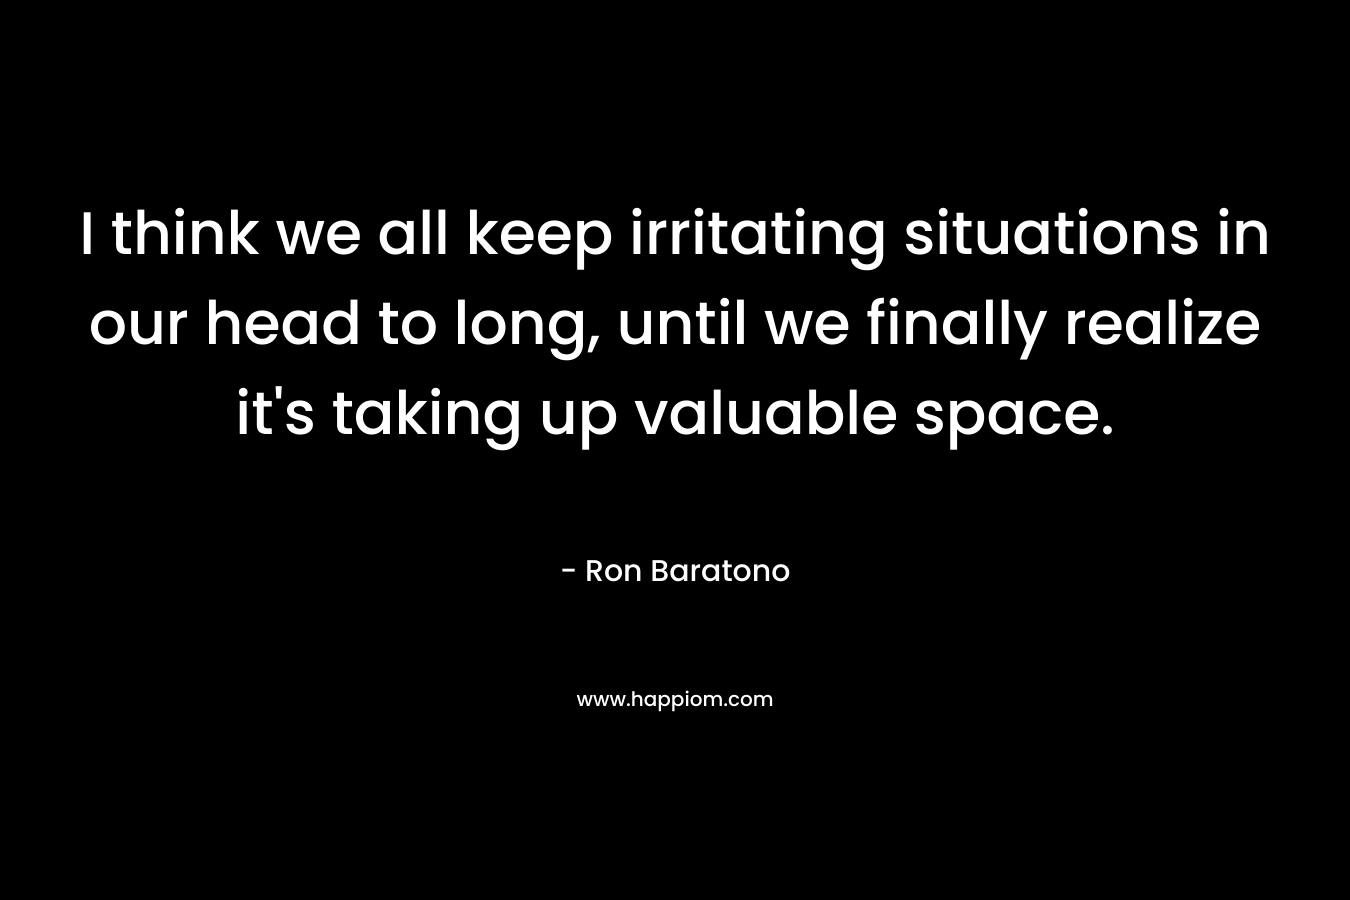 I think we all keep irritating situations in our head to long, until we finally realize it's taking up valuable space.